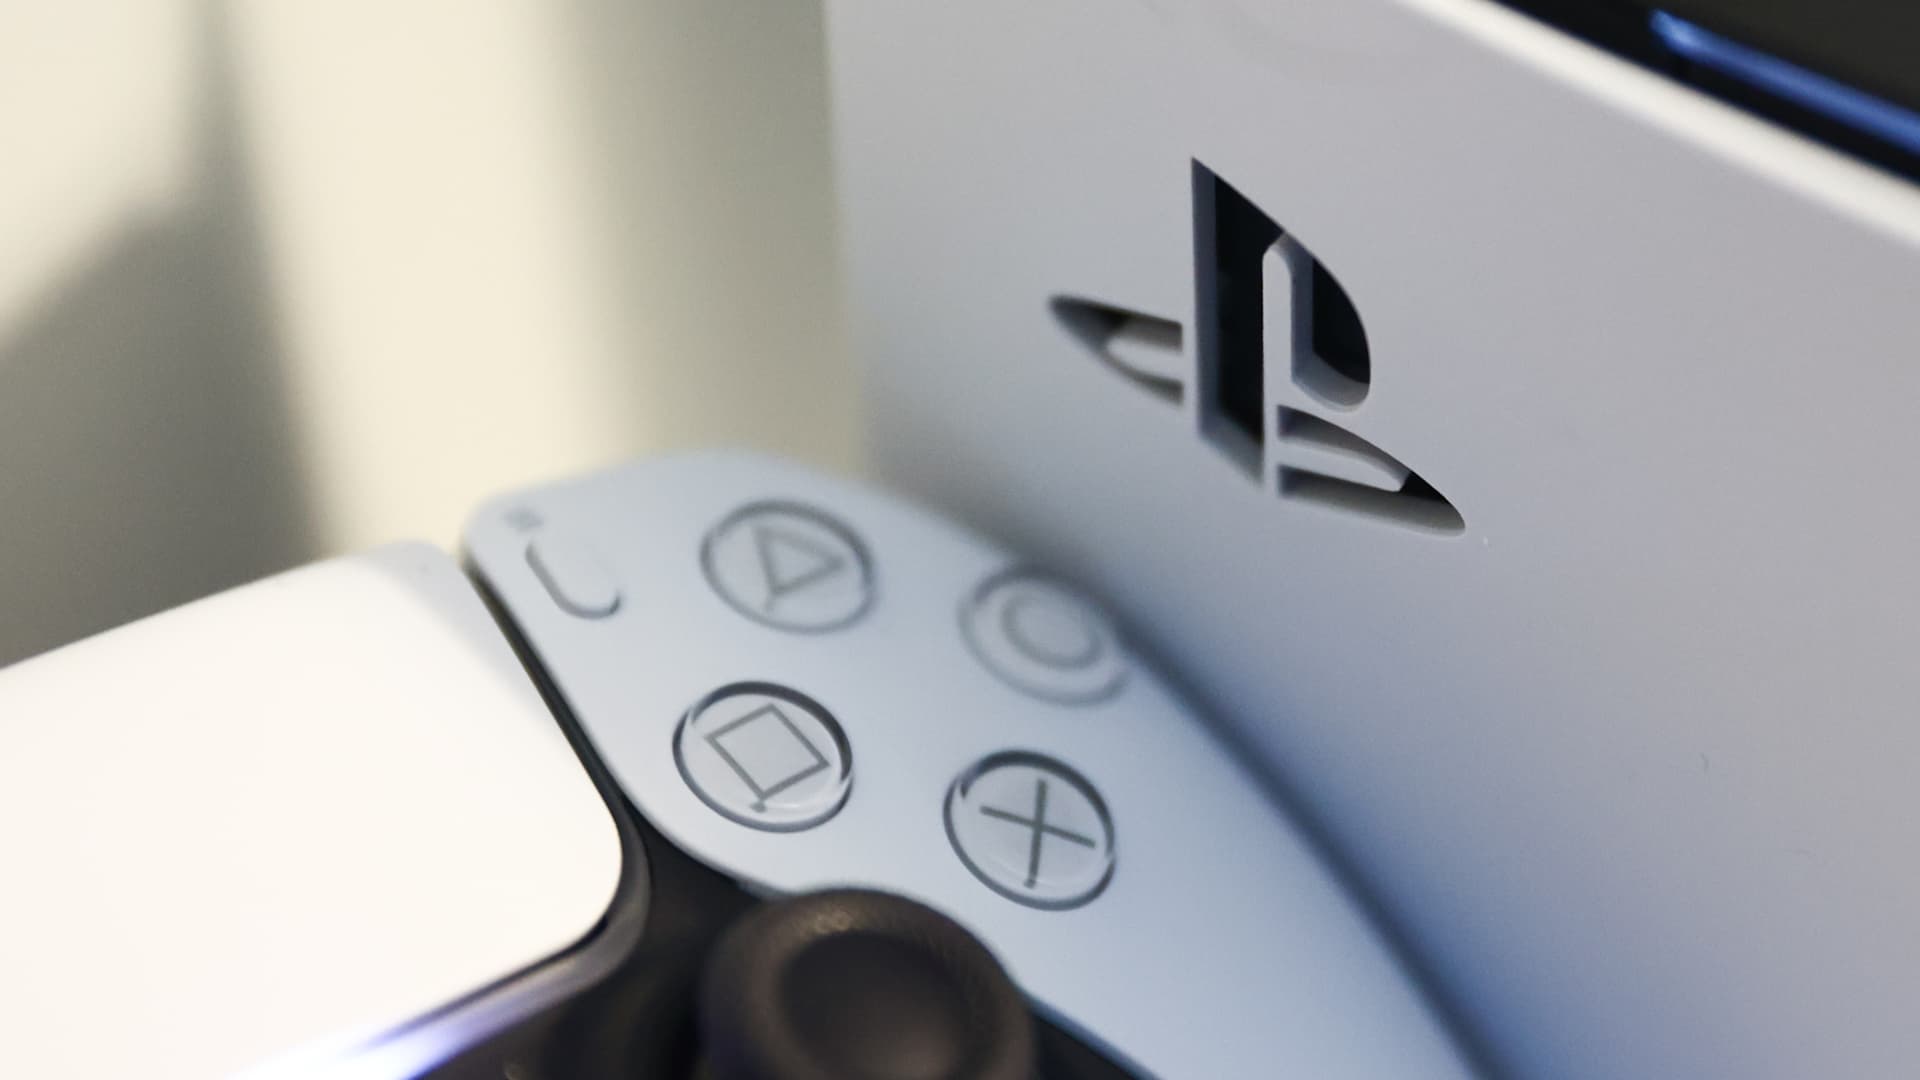 PlayStation maker Sony invests in African gaming startup Carry1st